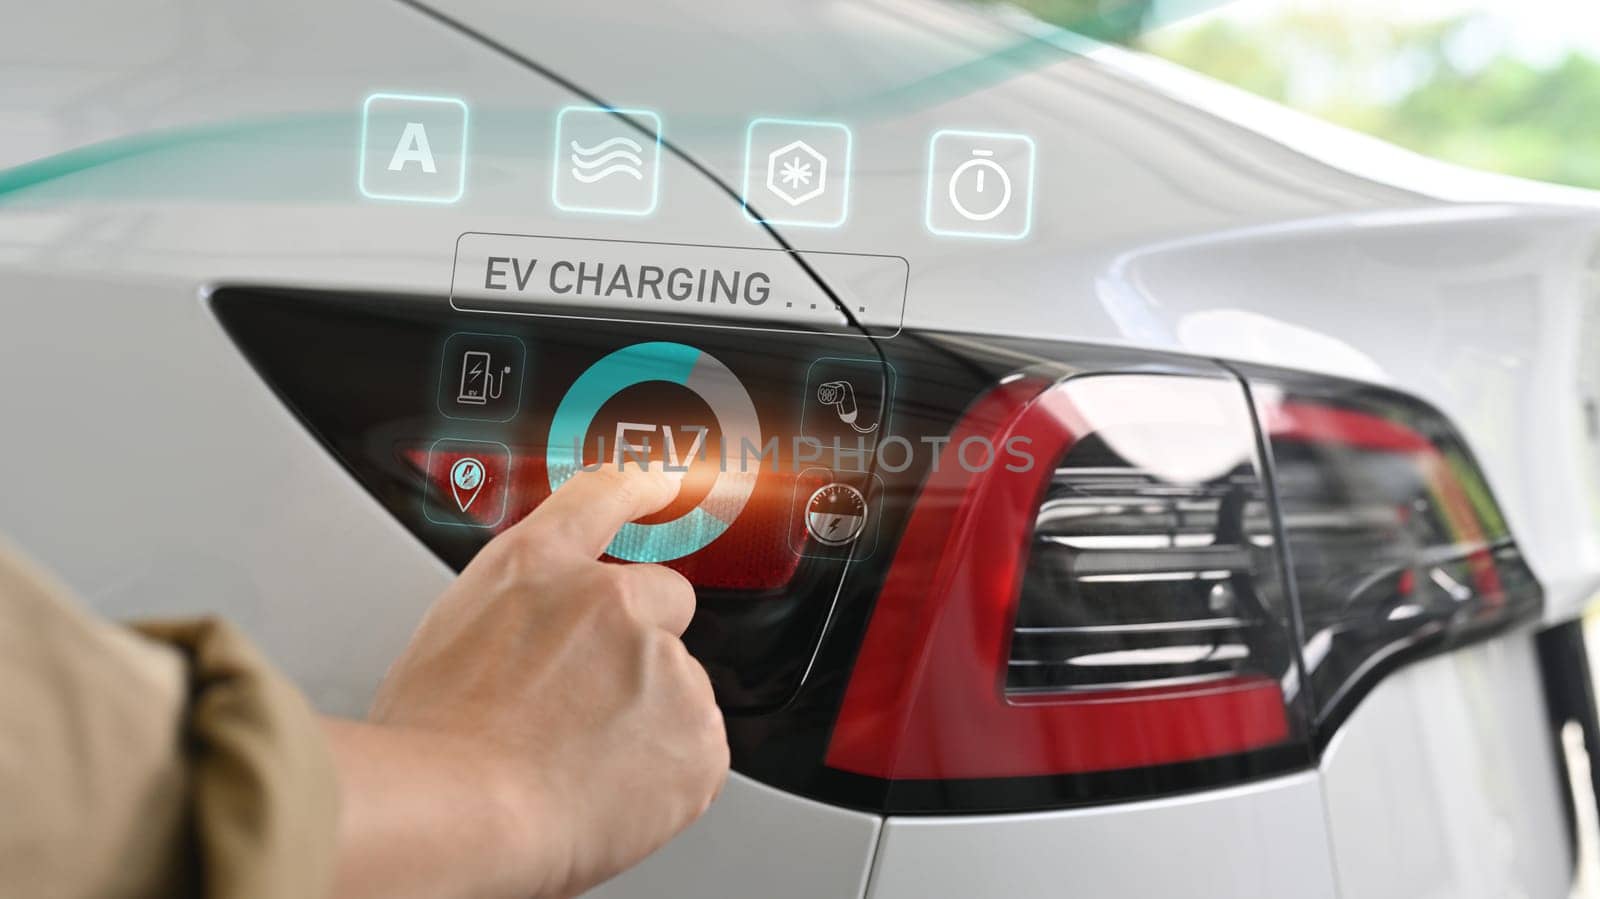 Cropped unrecognizable person hand opening a socket cap to preparing to charge an electric car.